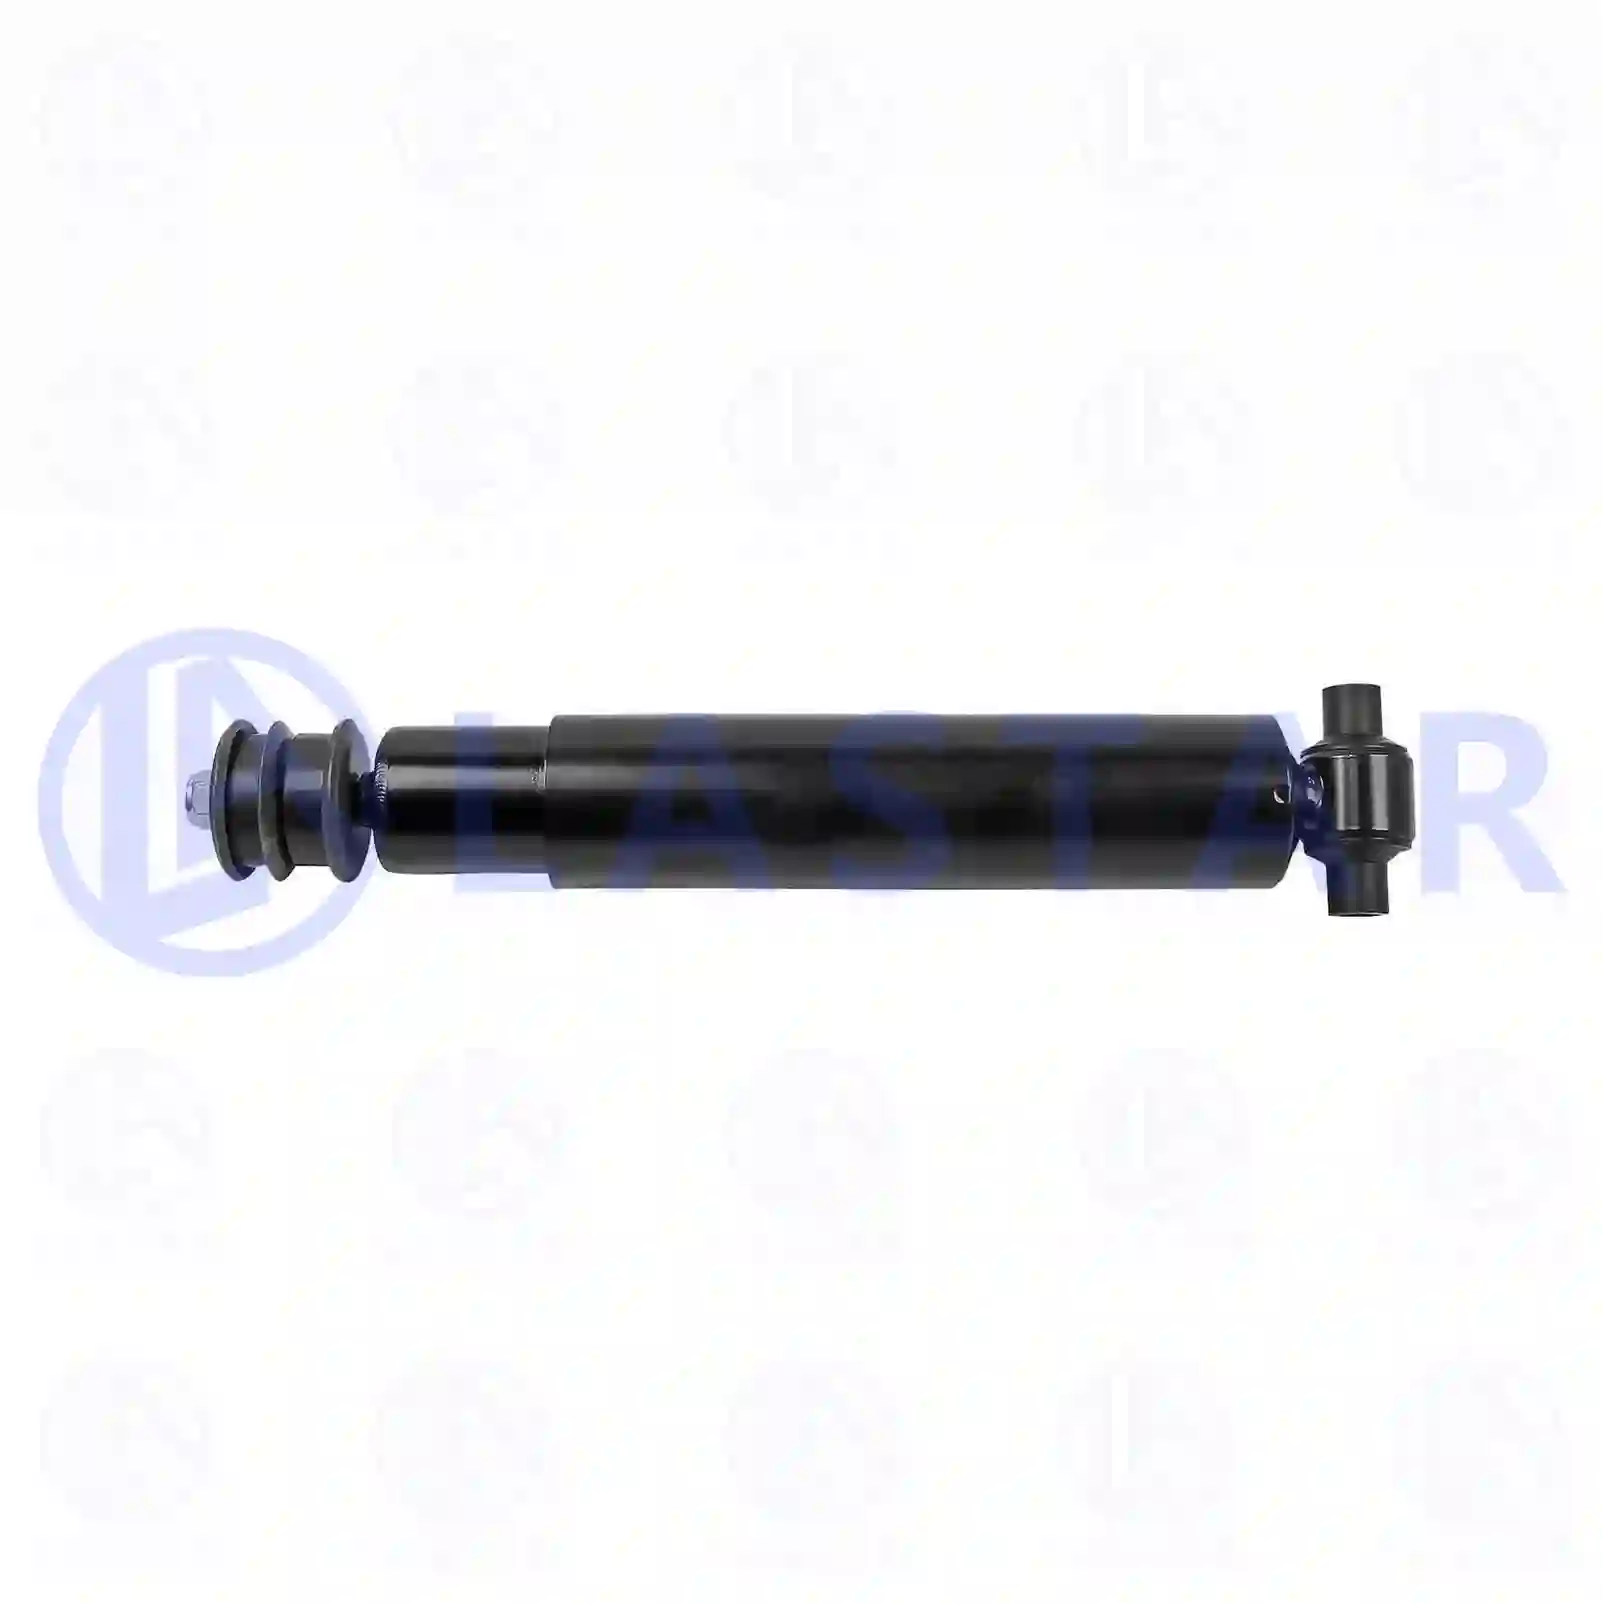 Shock absorber, 77728878, 7420583421, 1629405, ZG41563-0008, , , , ||  77728878 Lastar Spare Part | Truck Spare Parts, Auotomotive Spare Parts Shock absorber, 77728878, 7420583421, 1629405, ZG41563-0008, , , , ||  77728878 Lastar Spare Part | Truck Spare Parts, Auotomotive Spare Parts